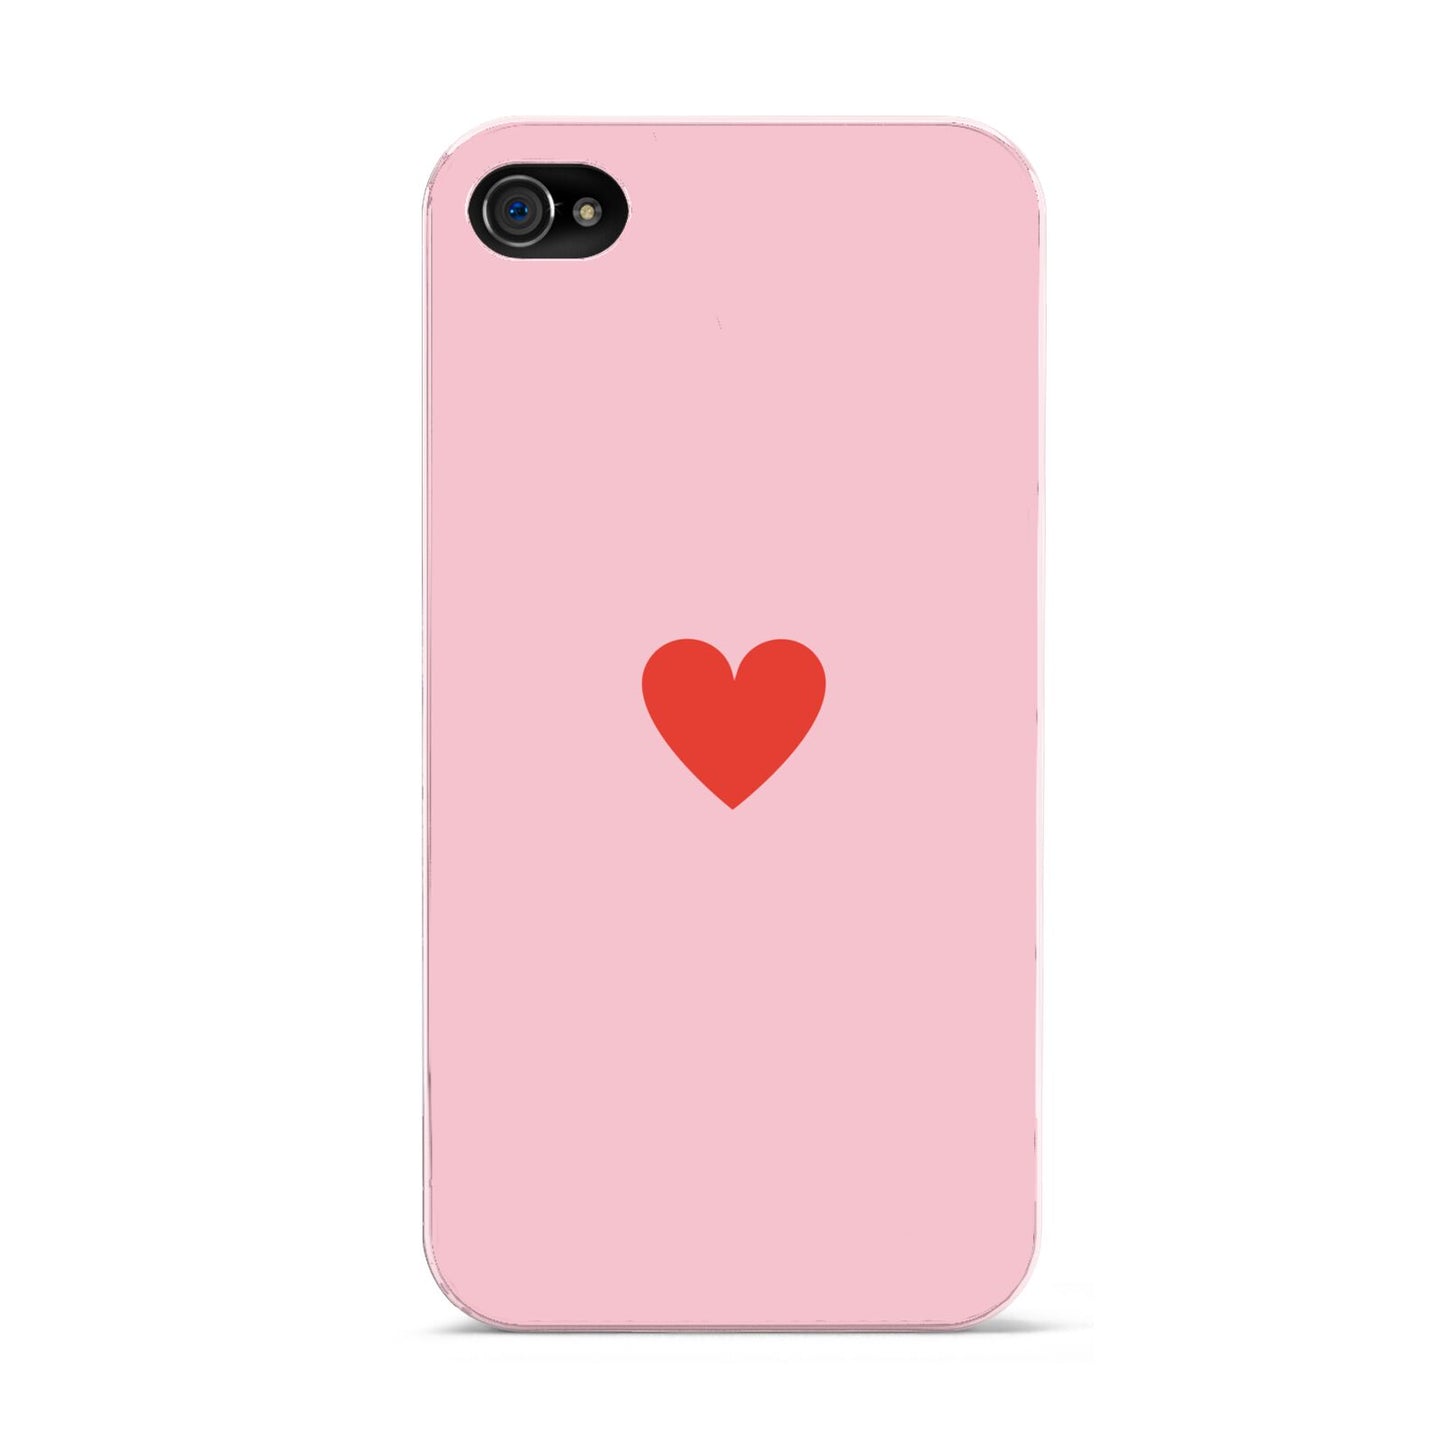 Red Heart Apple iPhone 4s Case